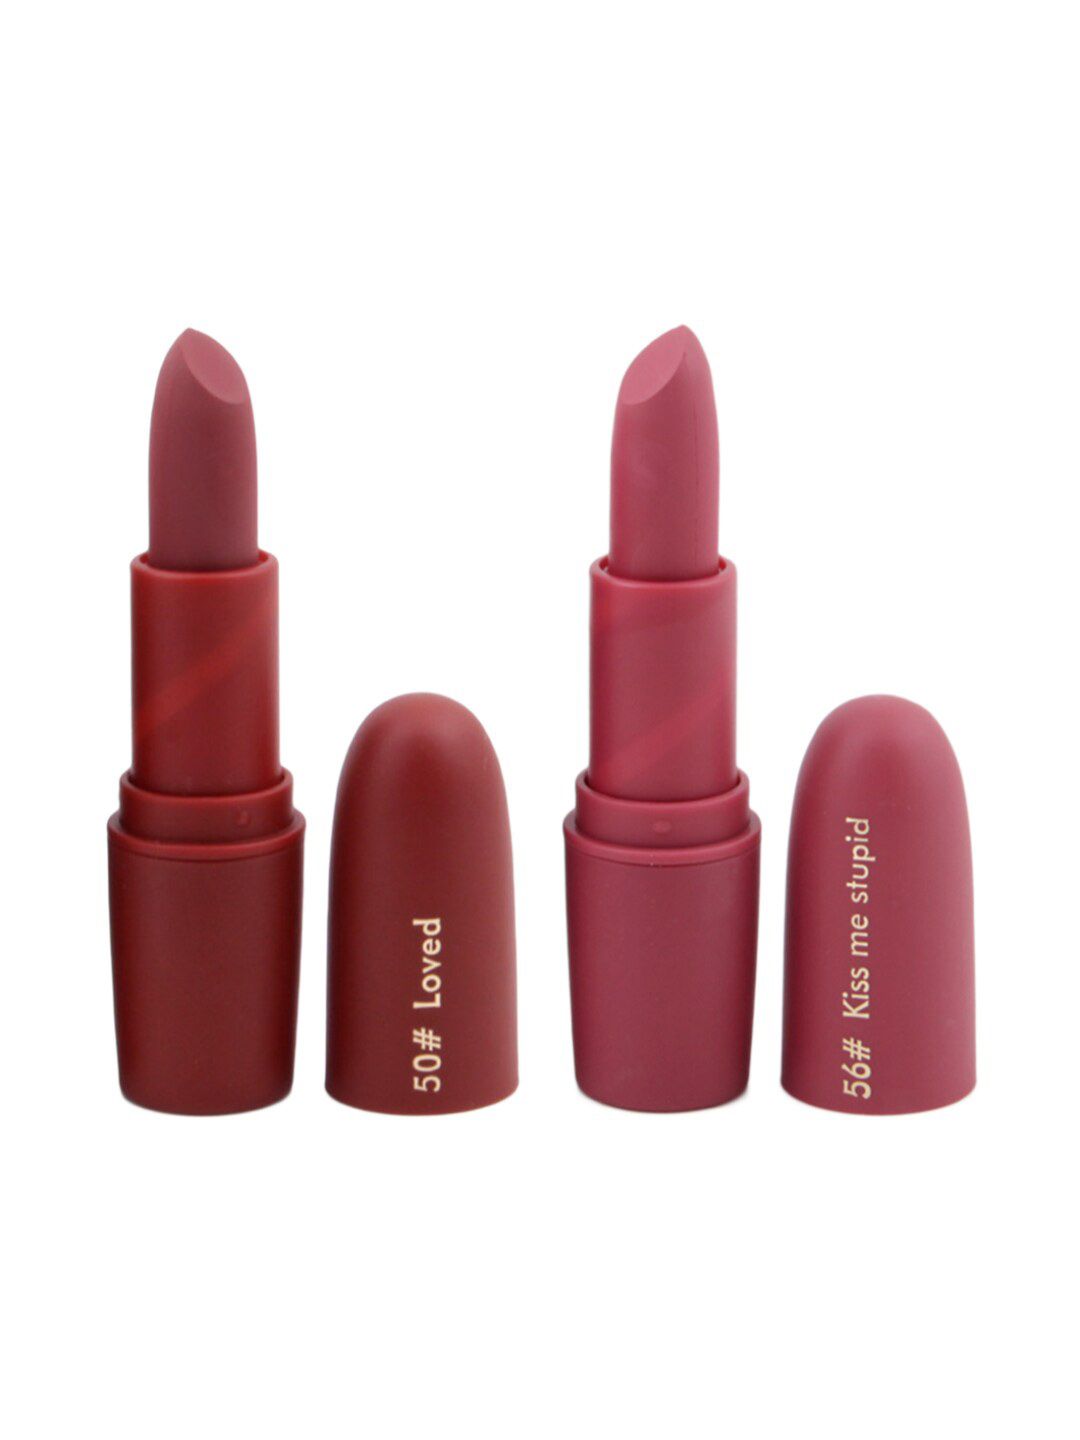 MISS ROSE Professional Make-Up Set of 2 Matte Lipsticks - Loved 50 & Kiss Me Stupid 56 Price in India